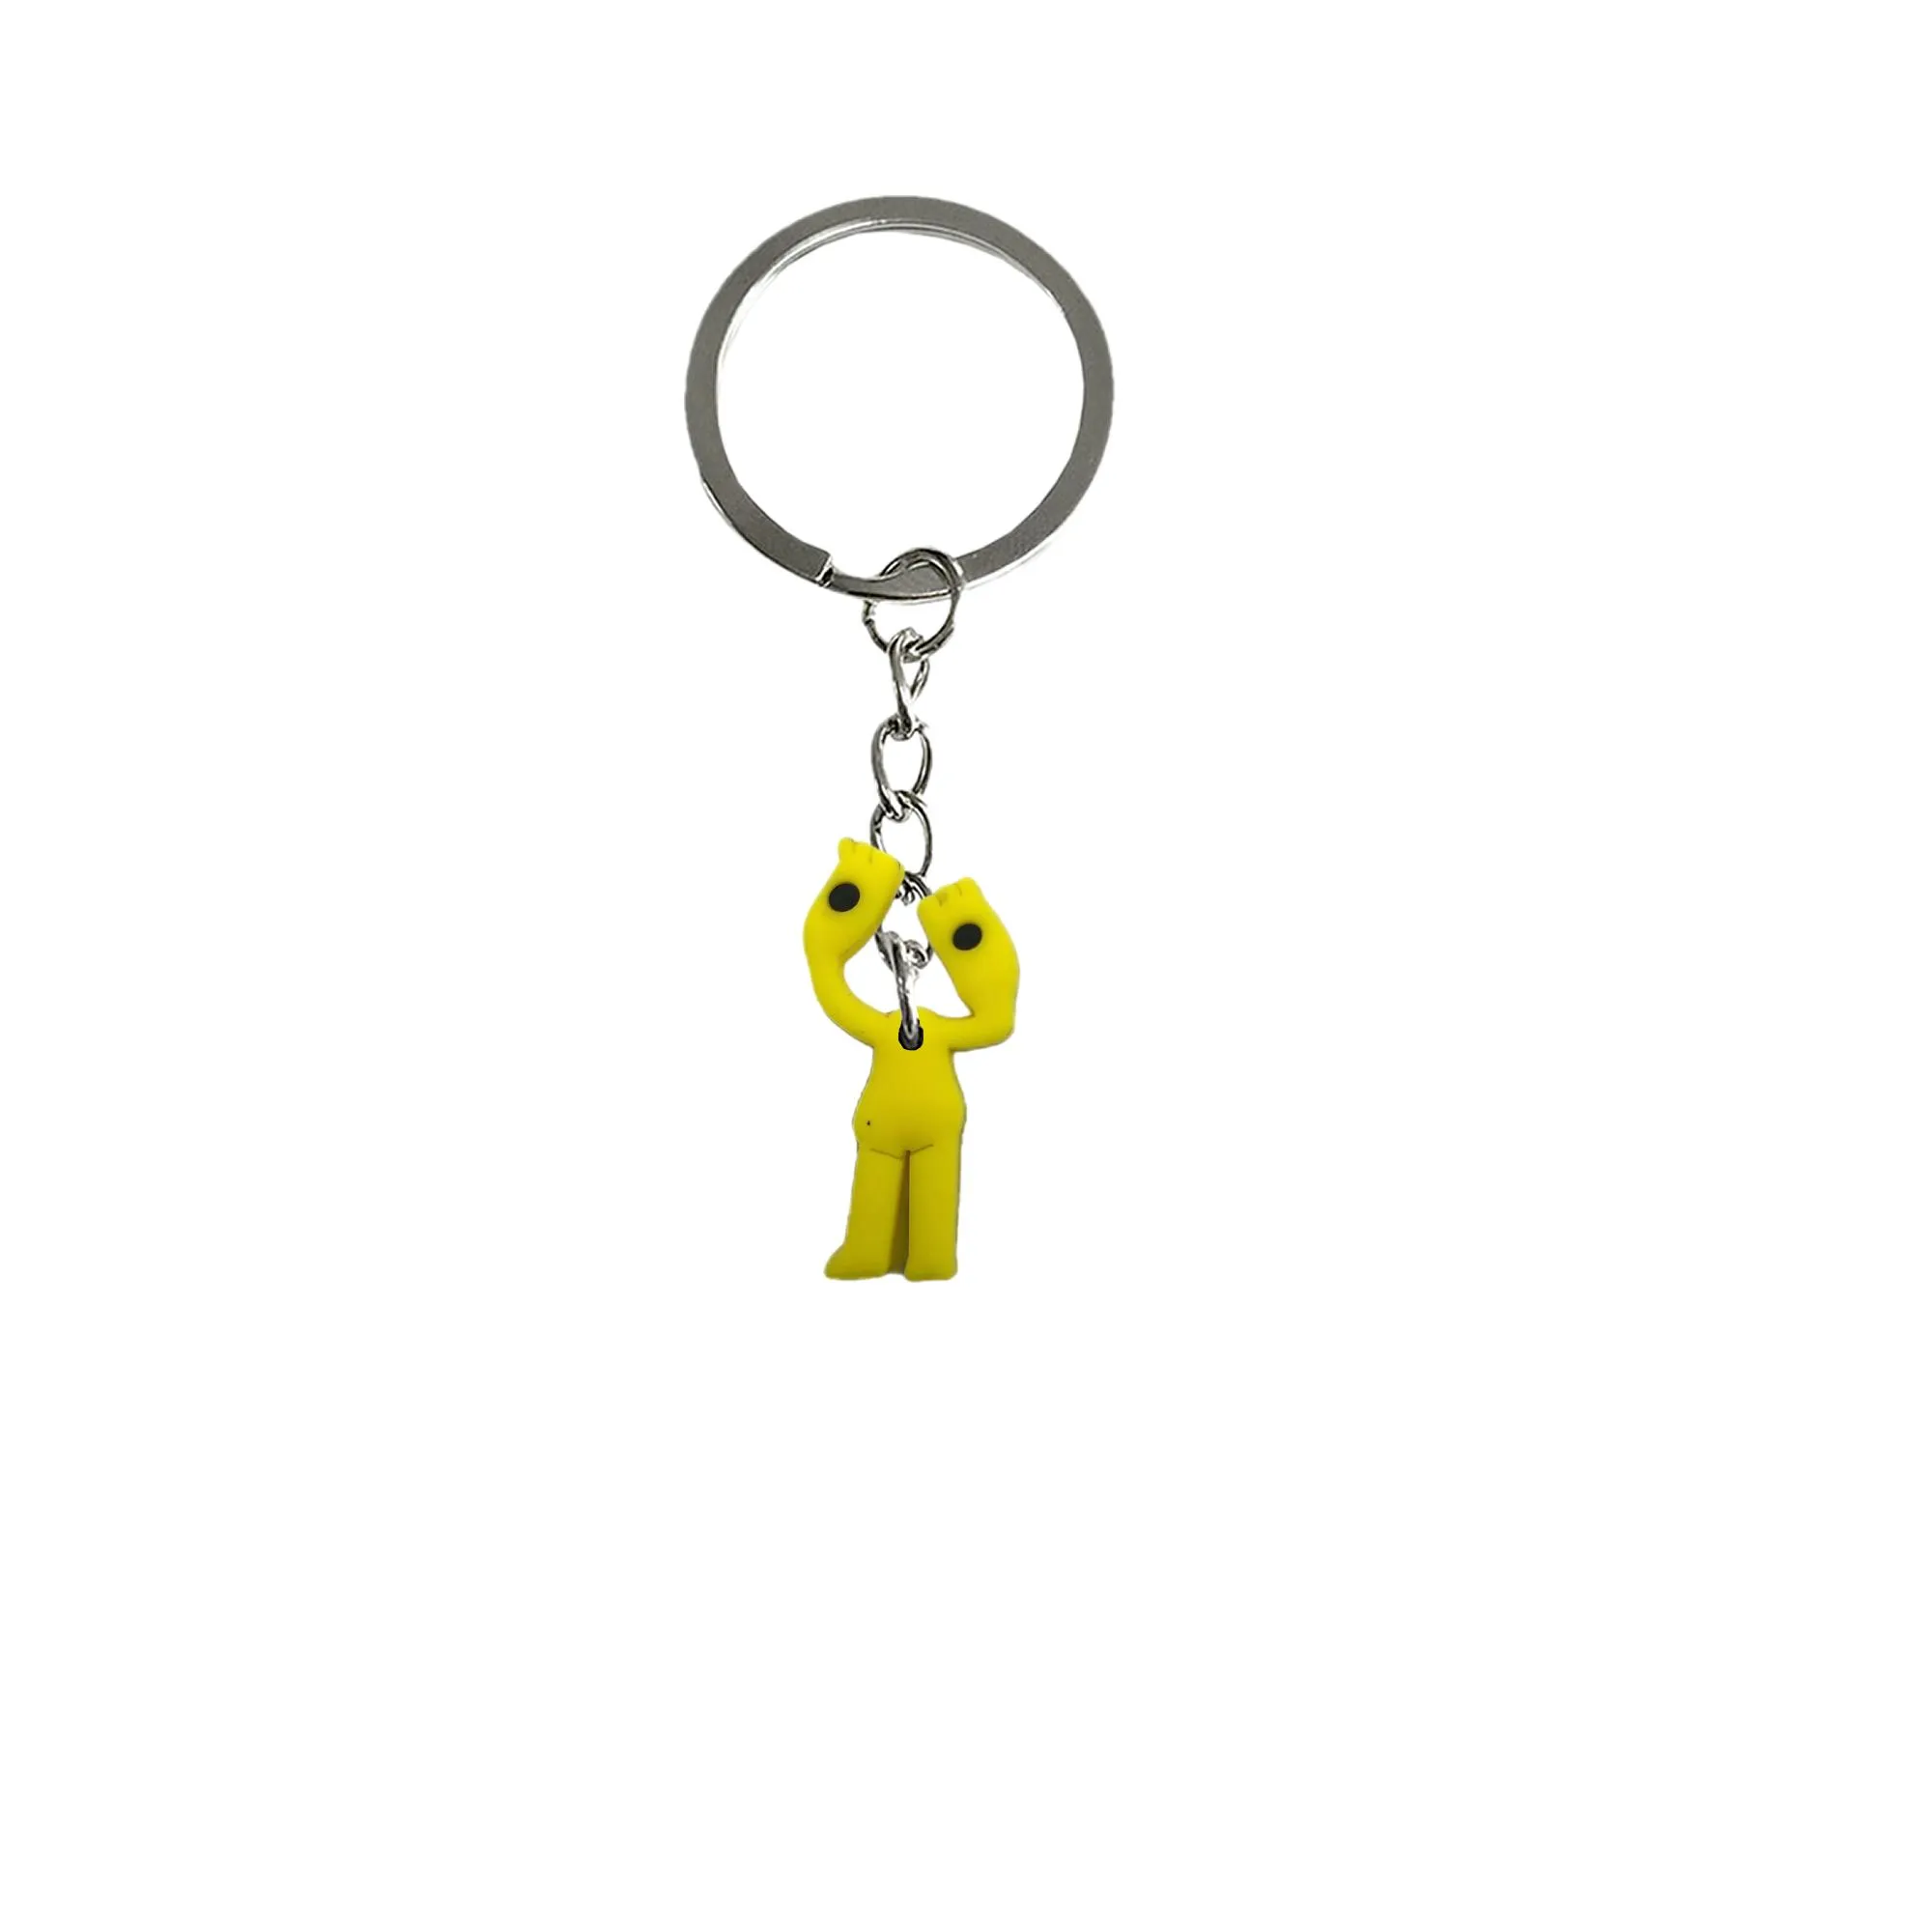 banban garden keychain keychains party favors key ring for boys rings keyring suitable schoolbag anime cool backpacks men backpack